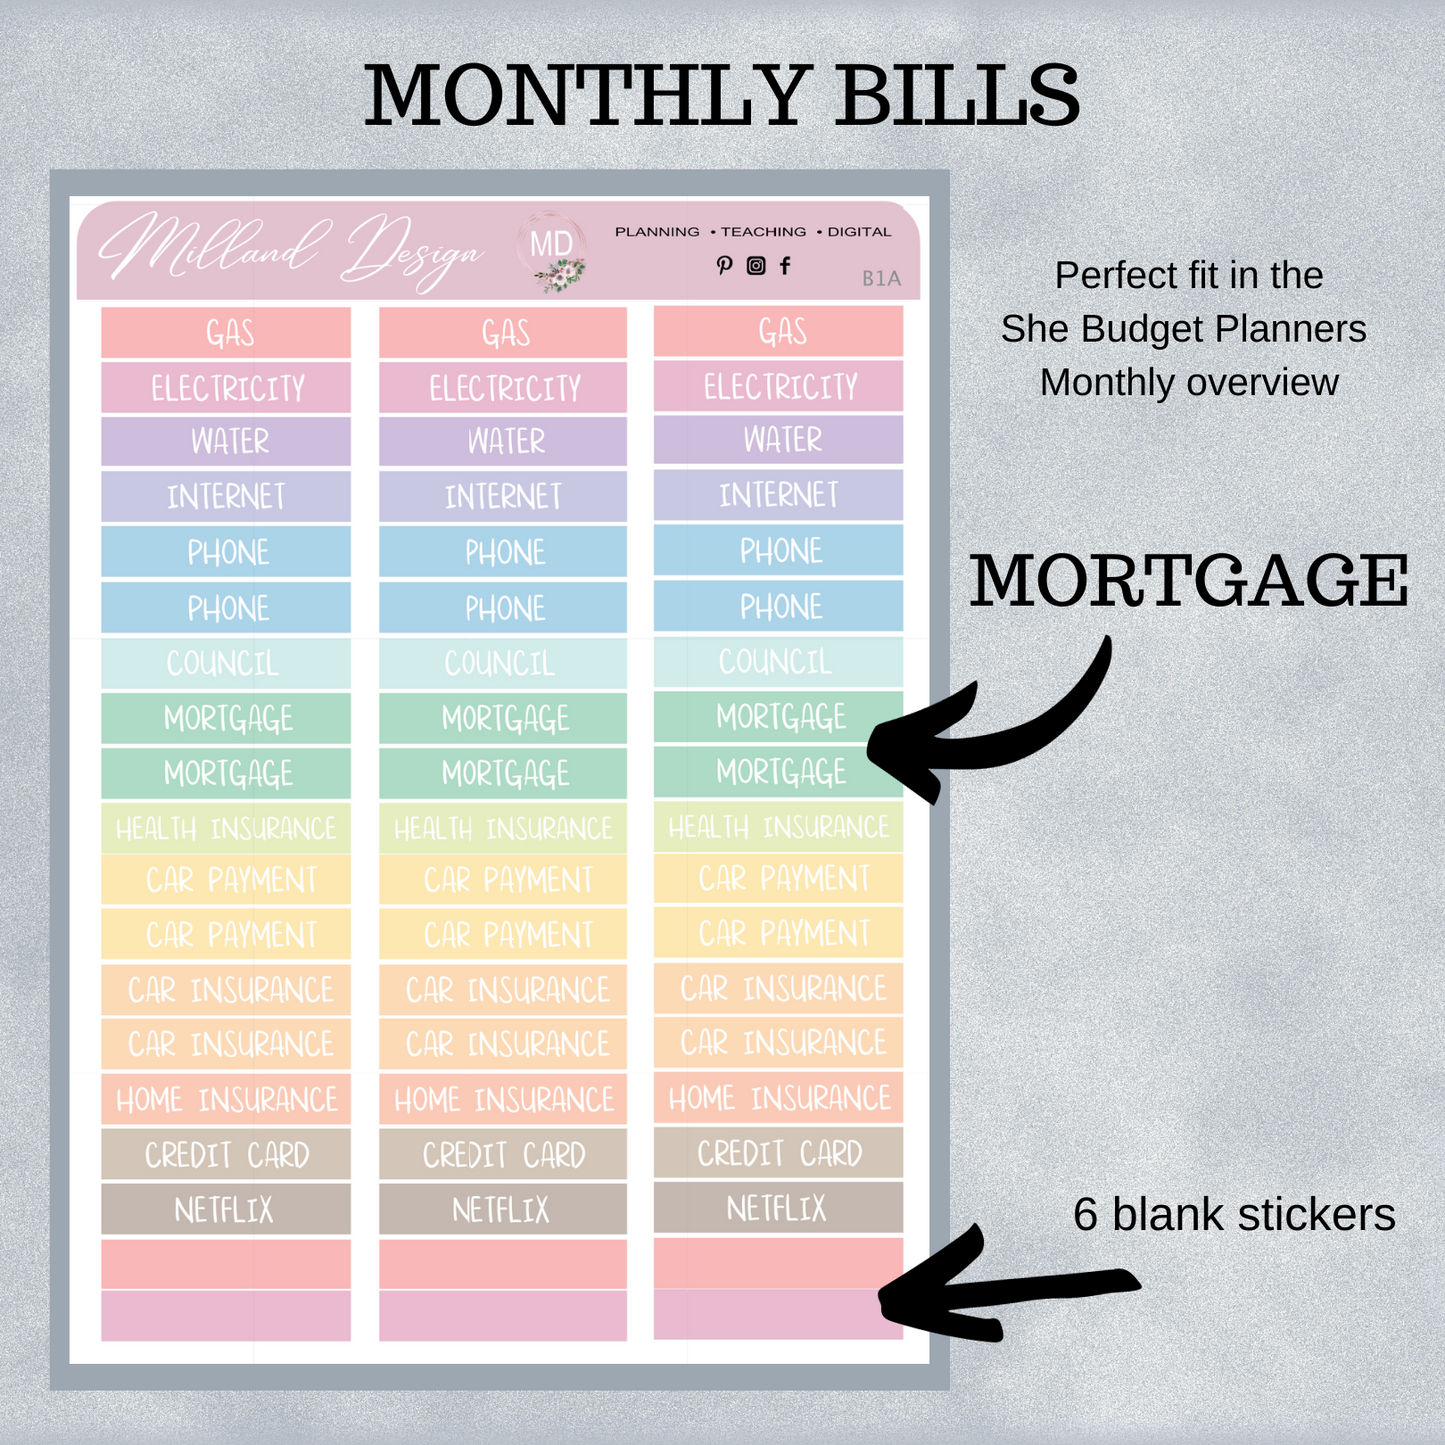 Monthly Bills - Fits the 'She Budget' Planners